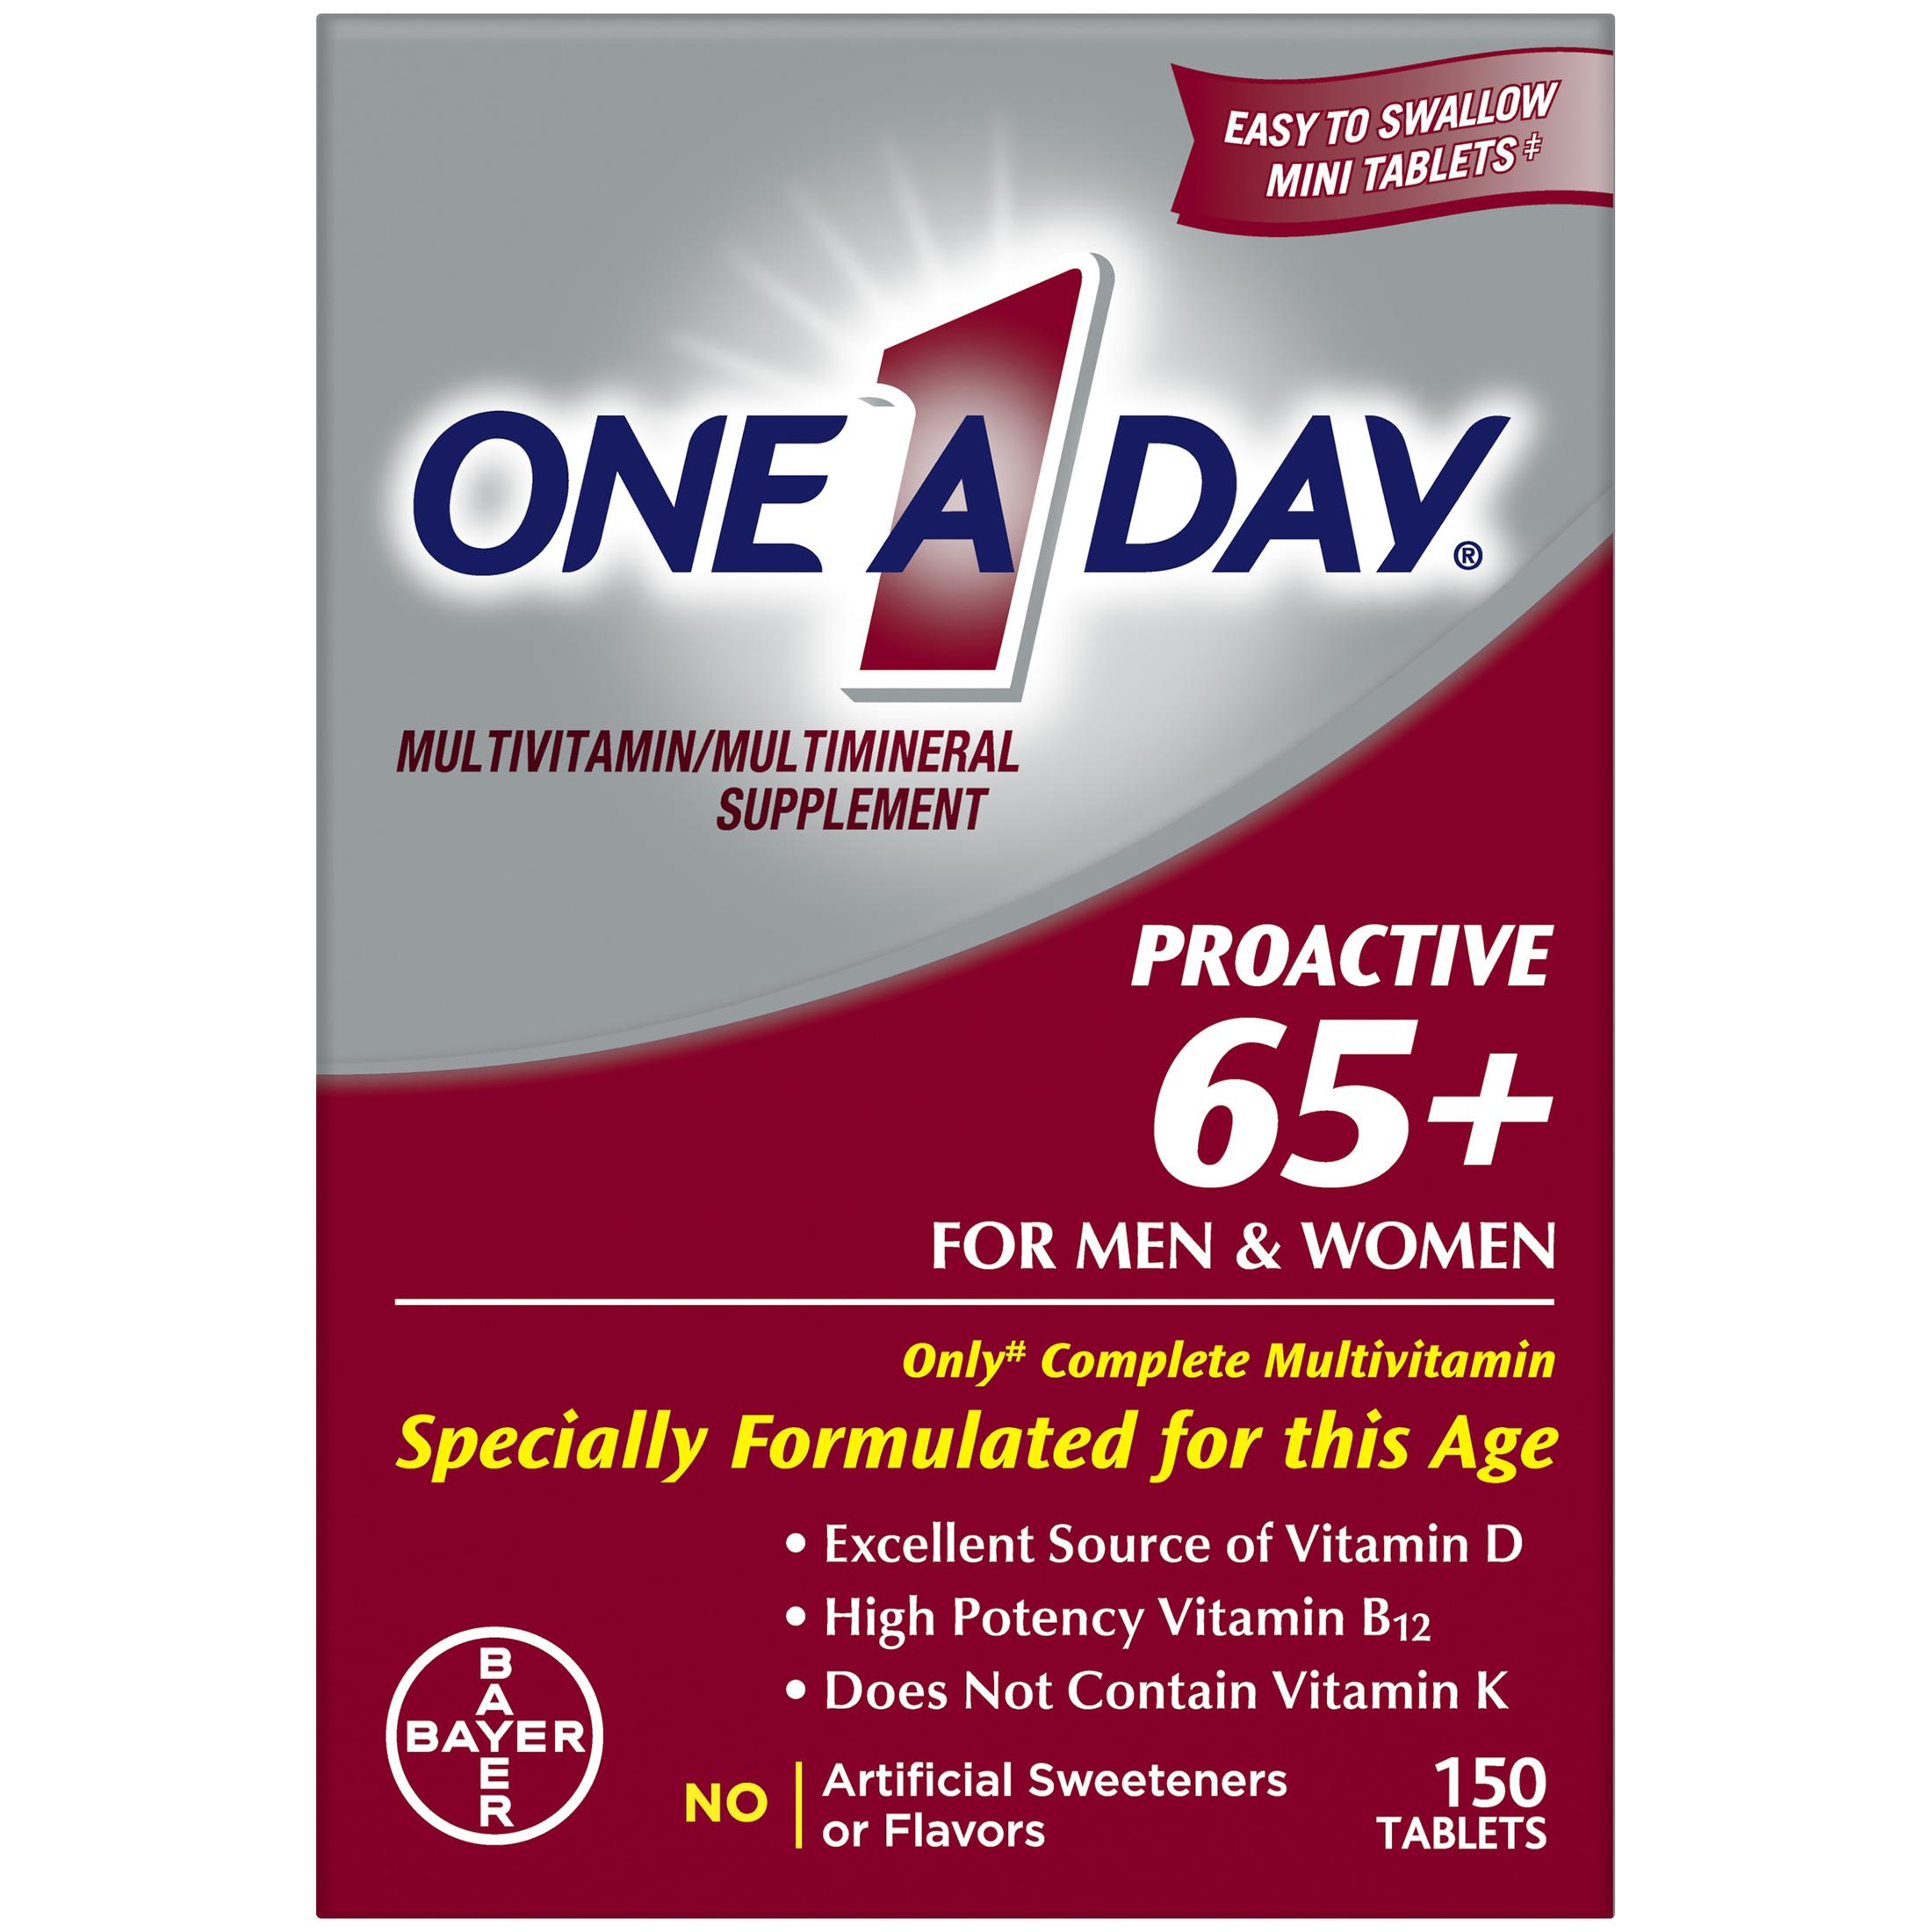 One A Day Proactive 65+ Multivitamin Tablets for Men and Women, 150ct - image 5 of 9